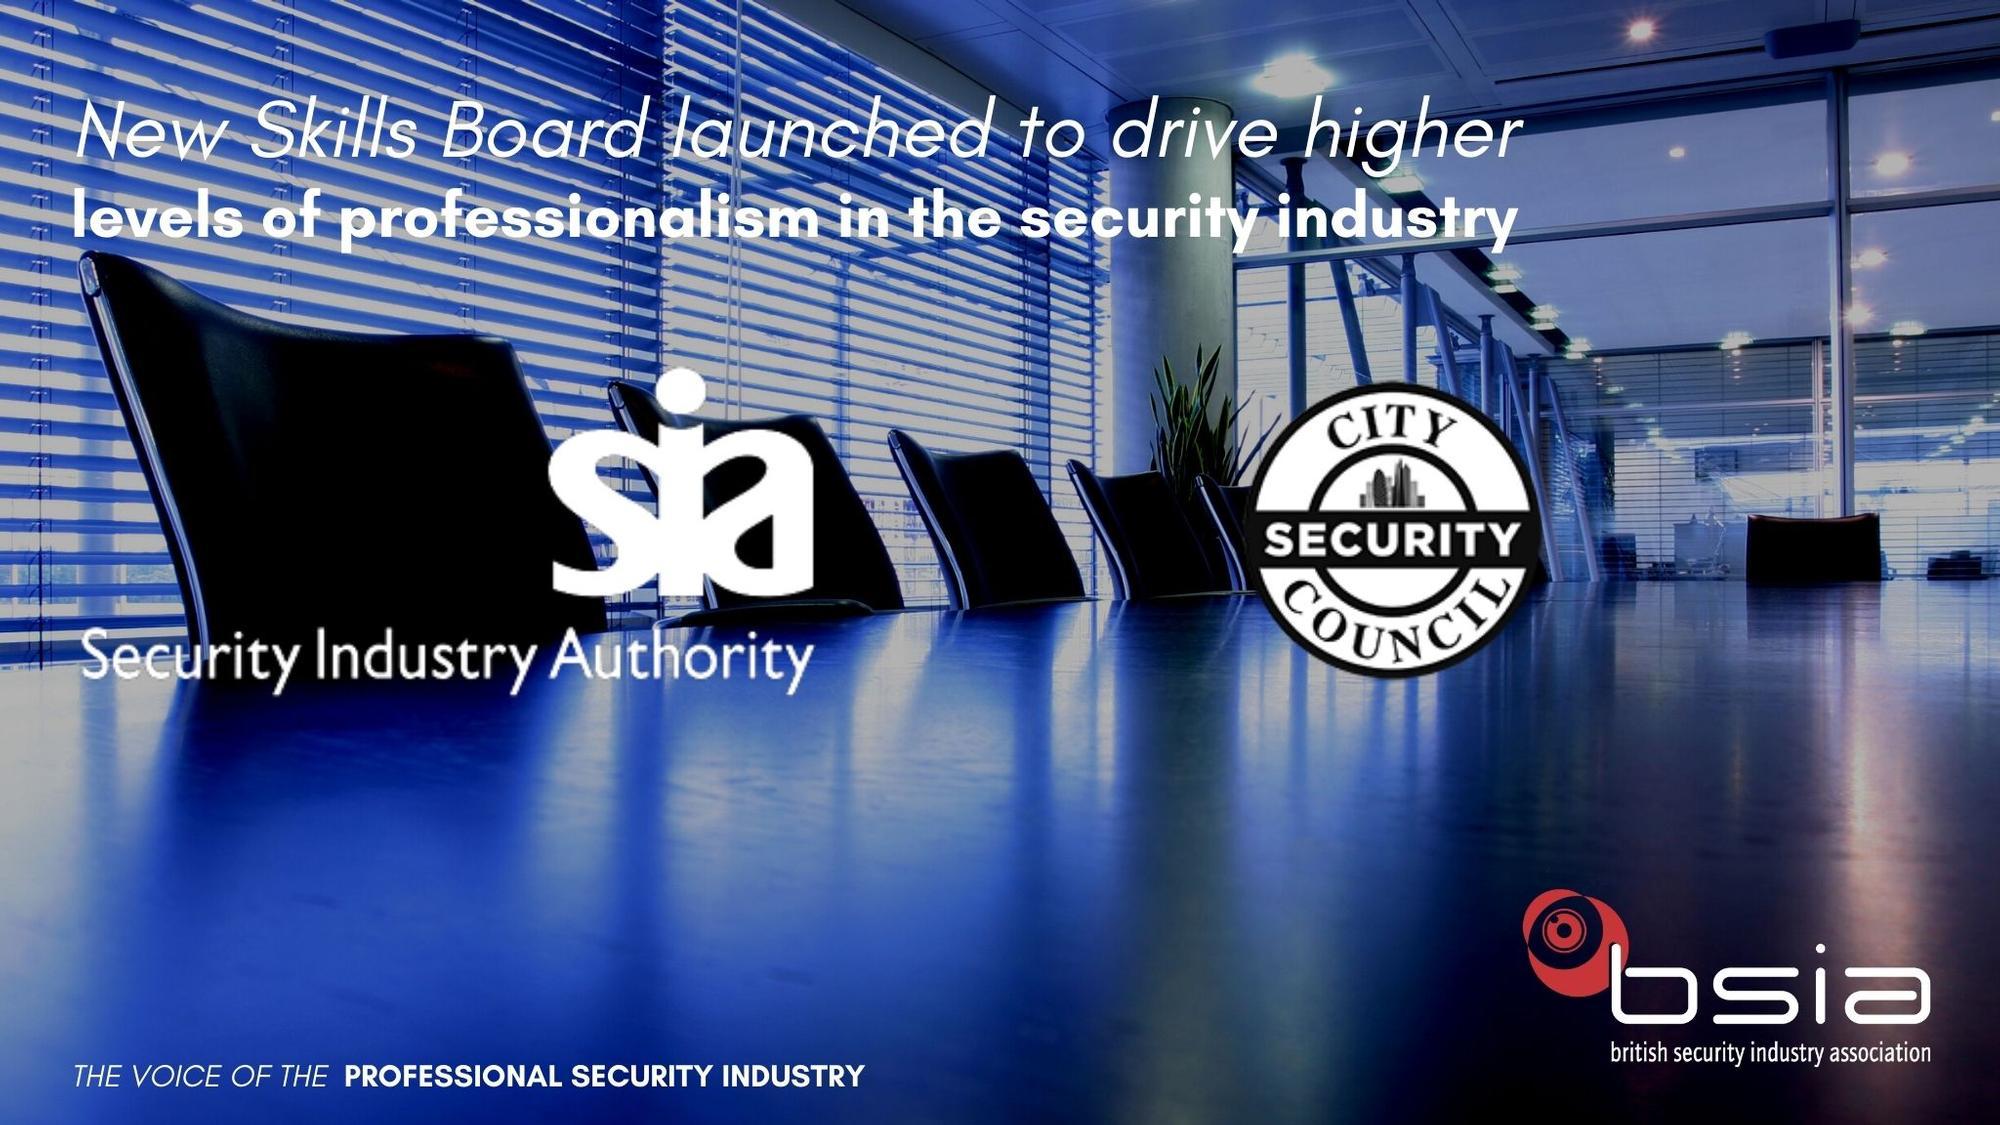 New Skills Board launched to drive higher levels of professionalism in the security industry